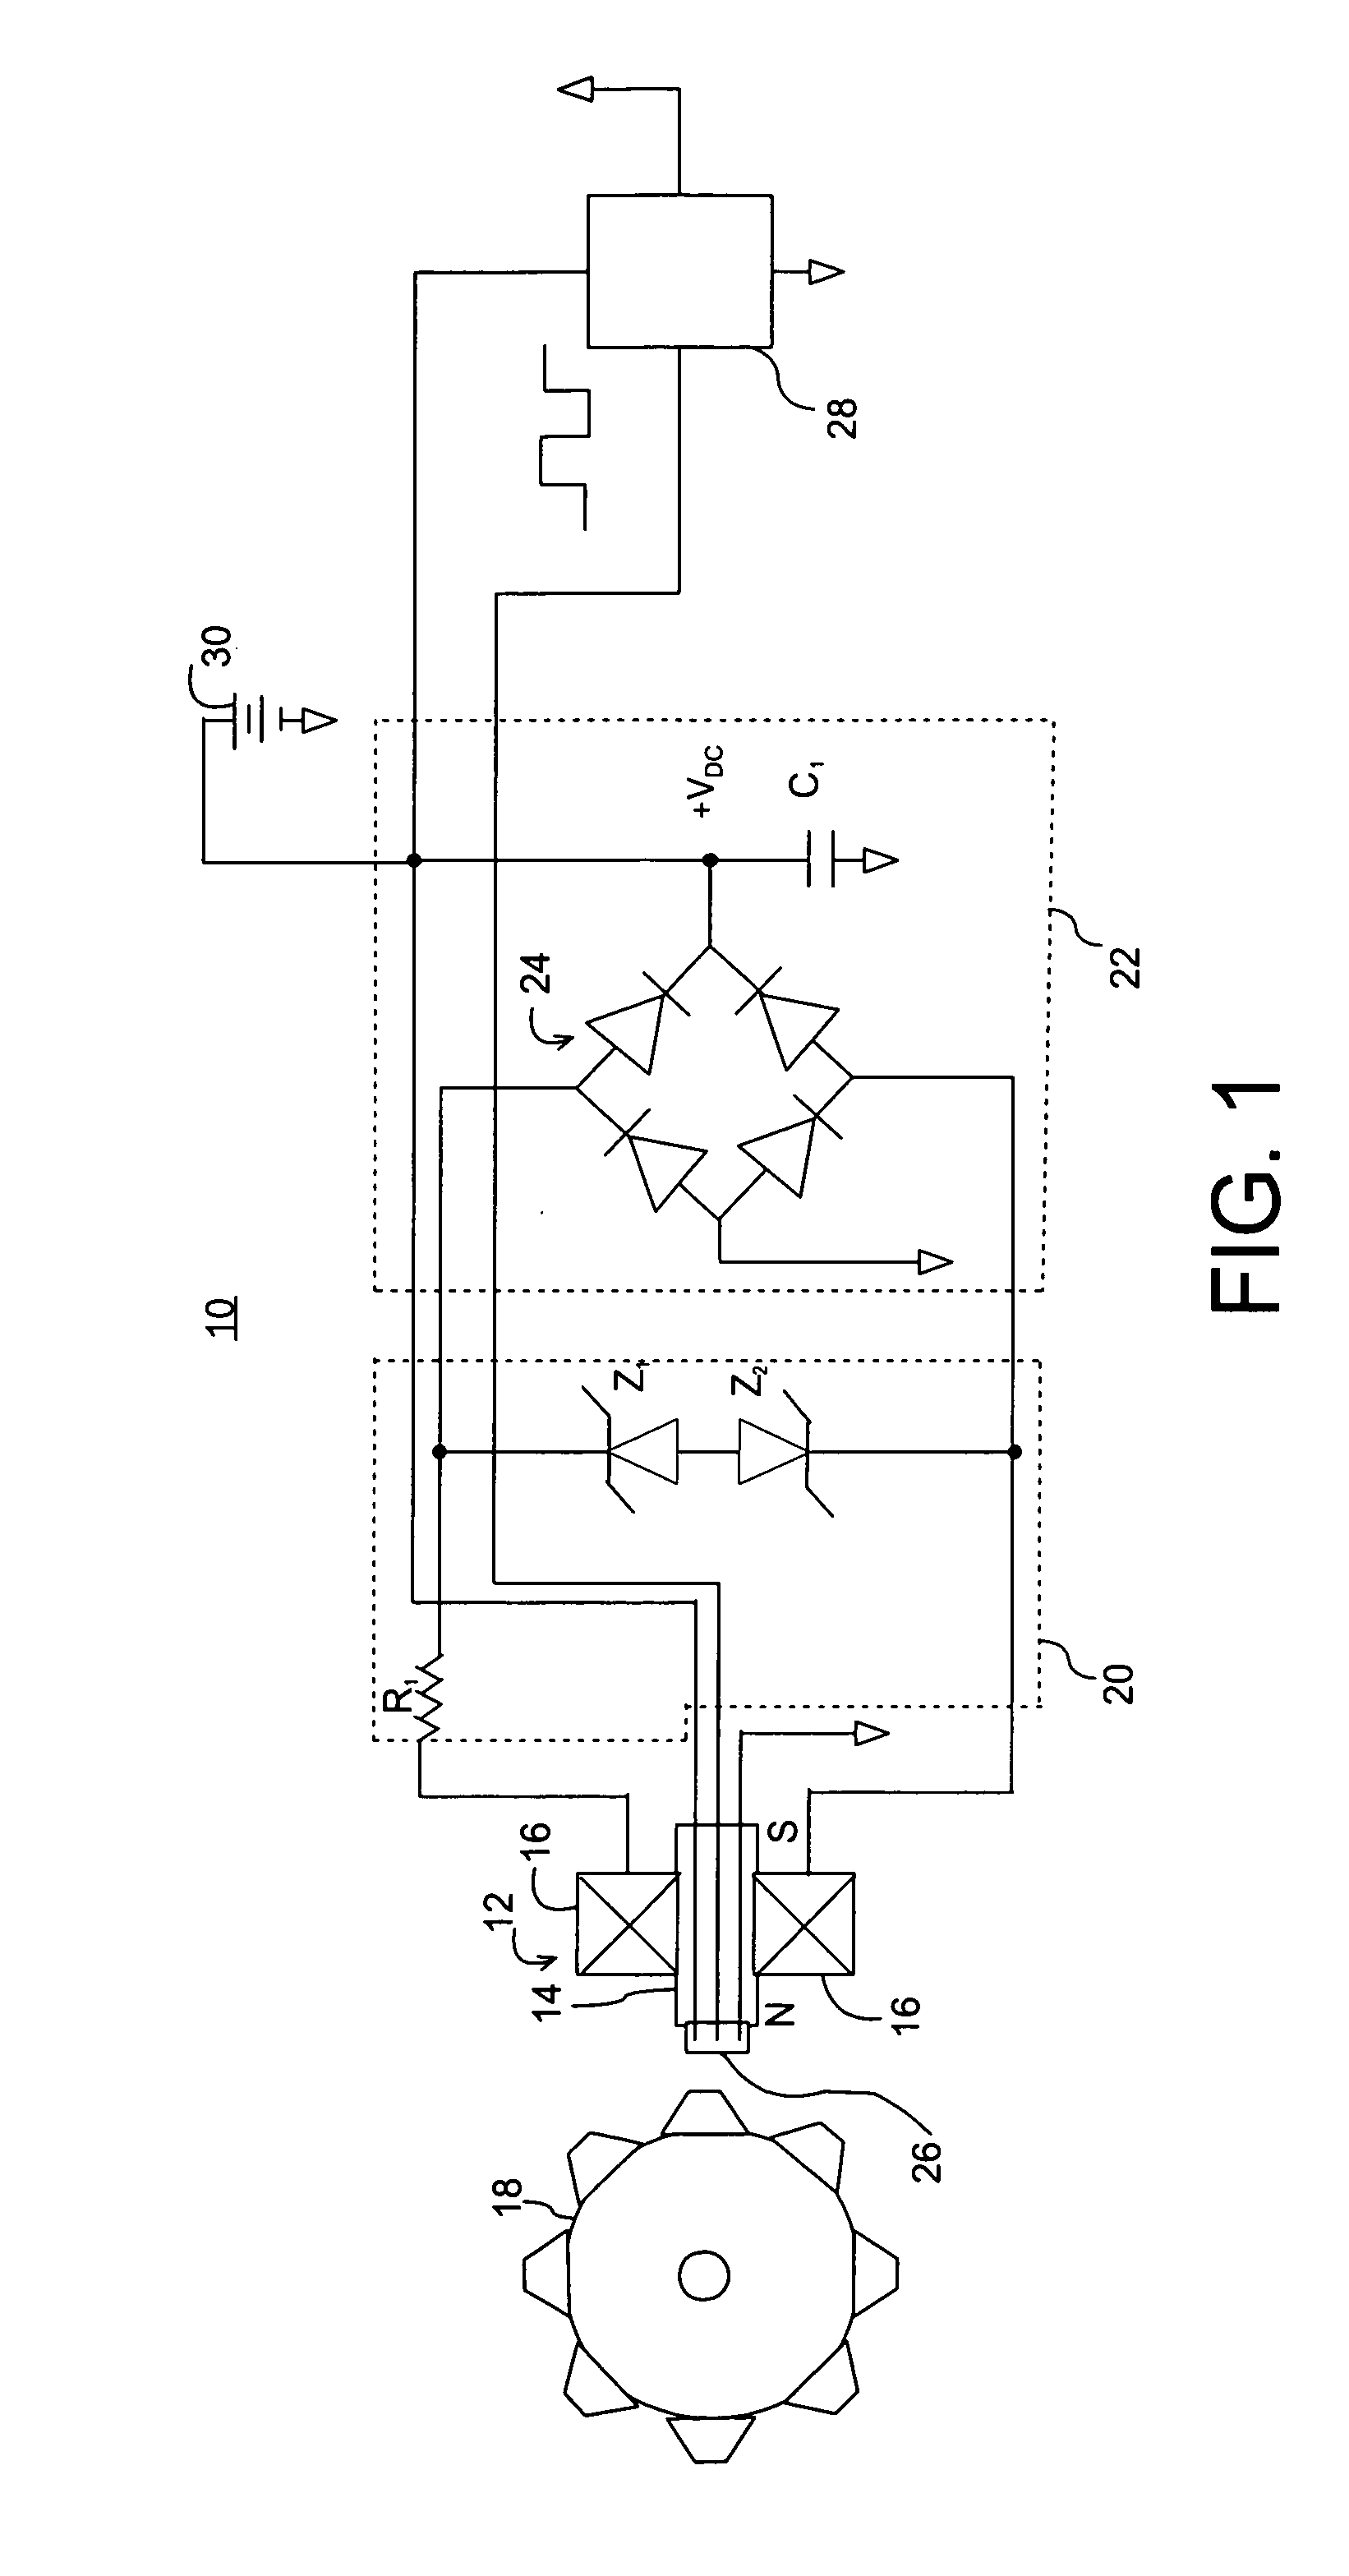 Self-powered wireless sensor assembly for sensing angular position of the engine crankshaft in a vehicle